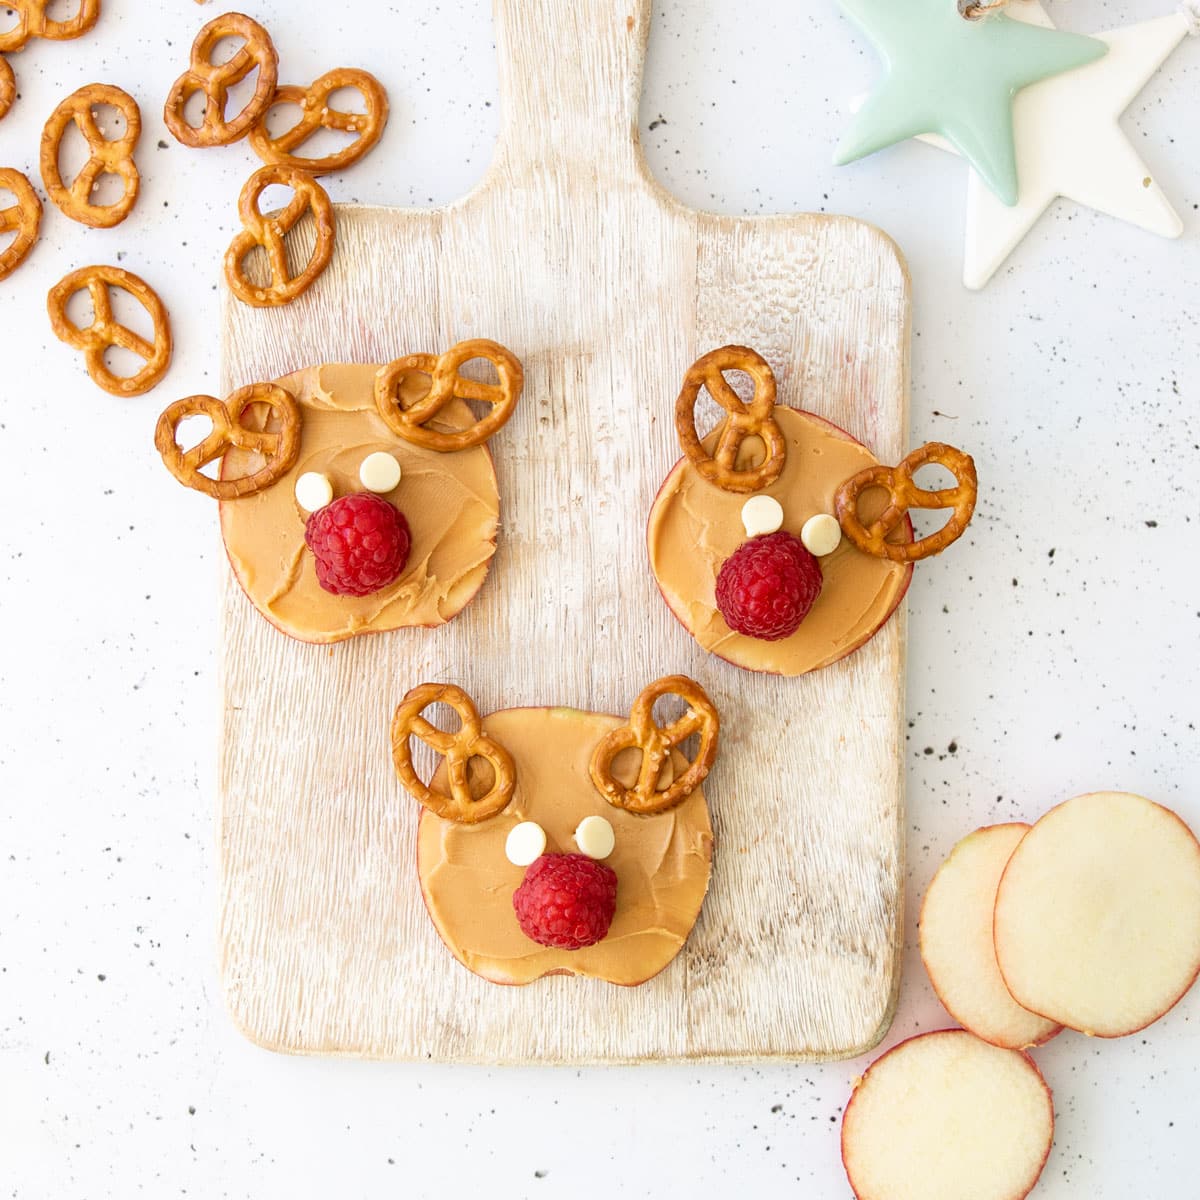 Three Slices of Apple Spread with Peanut Butter and Then Topped With Pretzels as Antlers, a Raspberry Nose and White Chocolate Drop Eyes. 